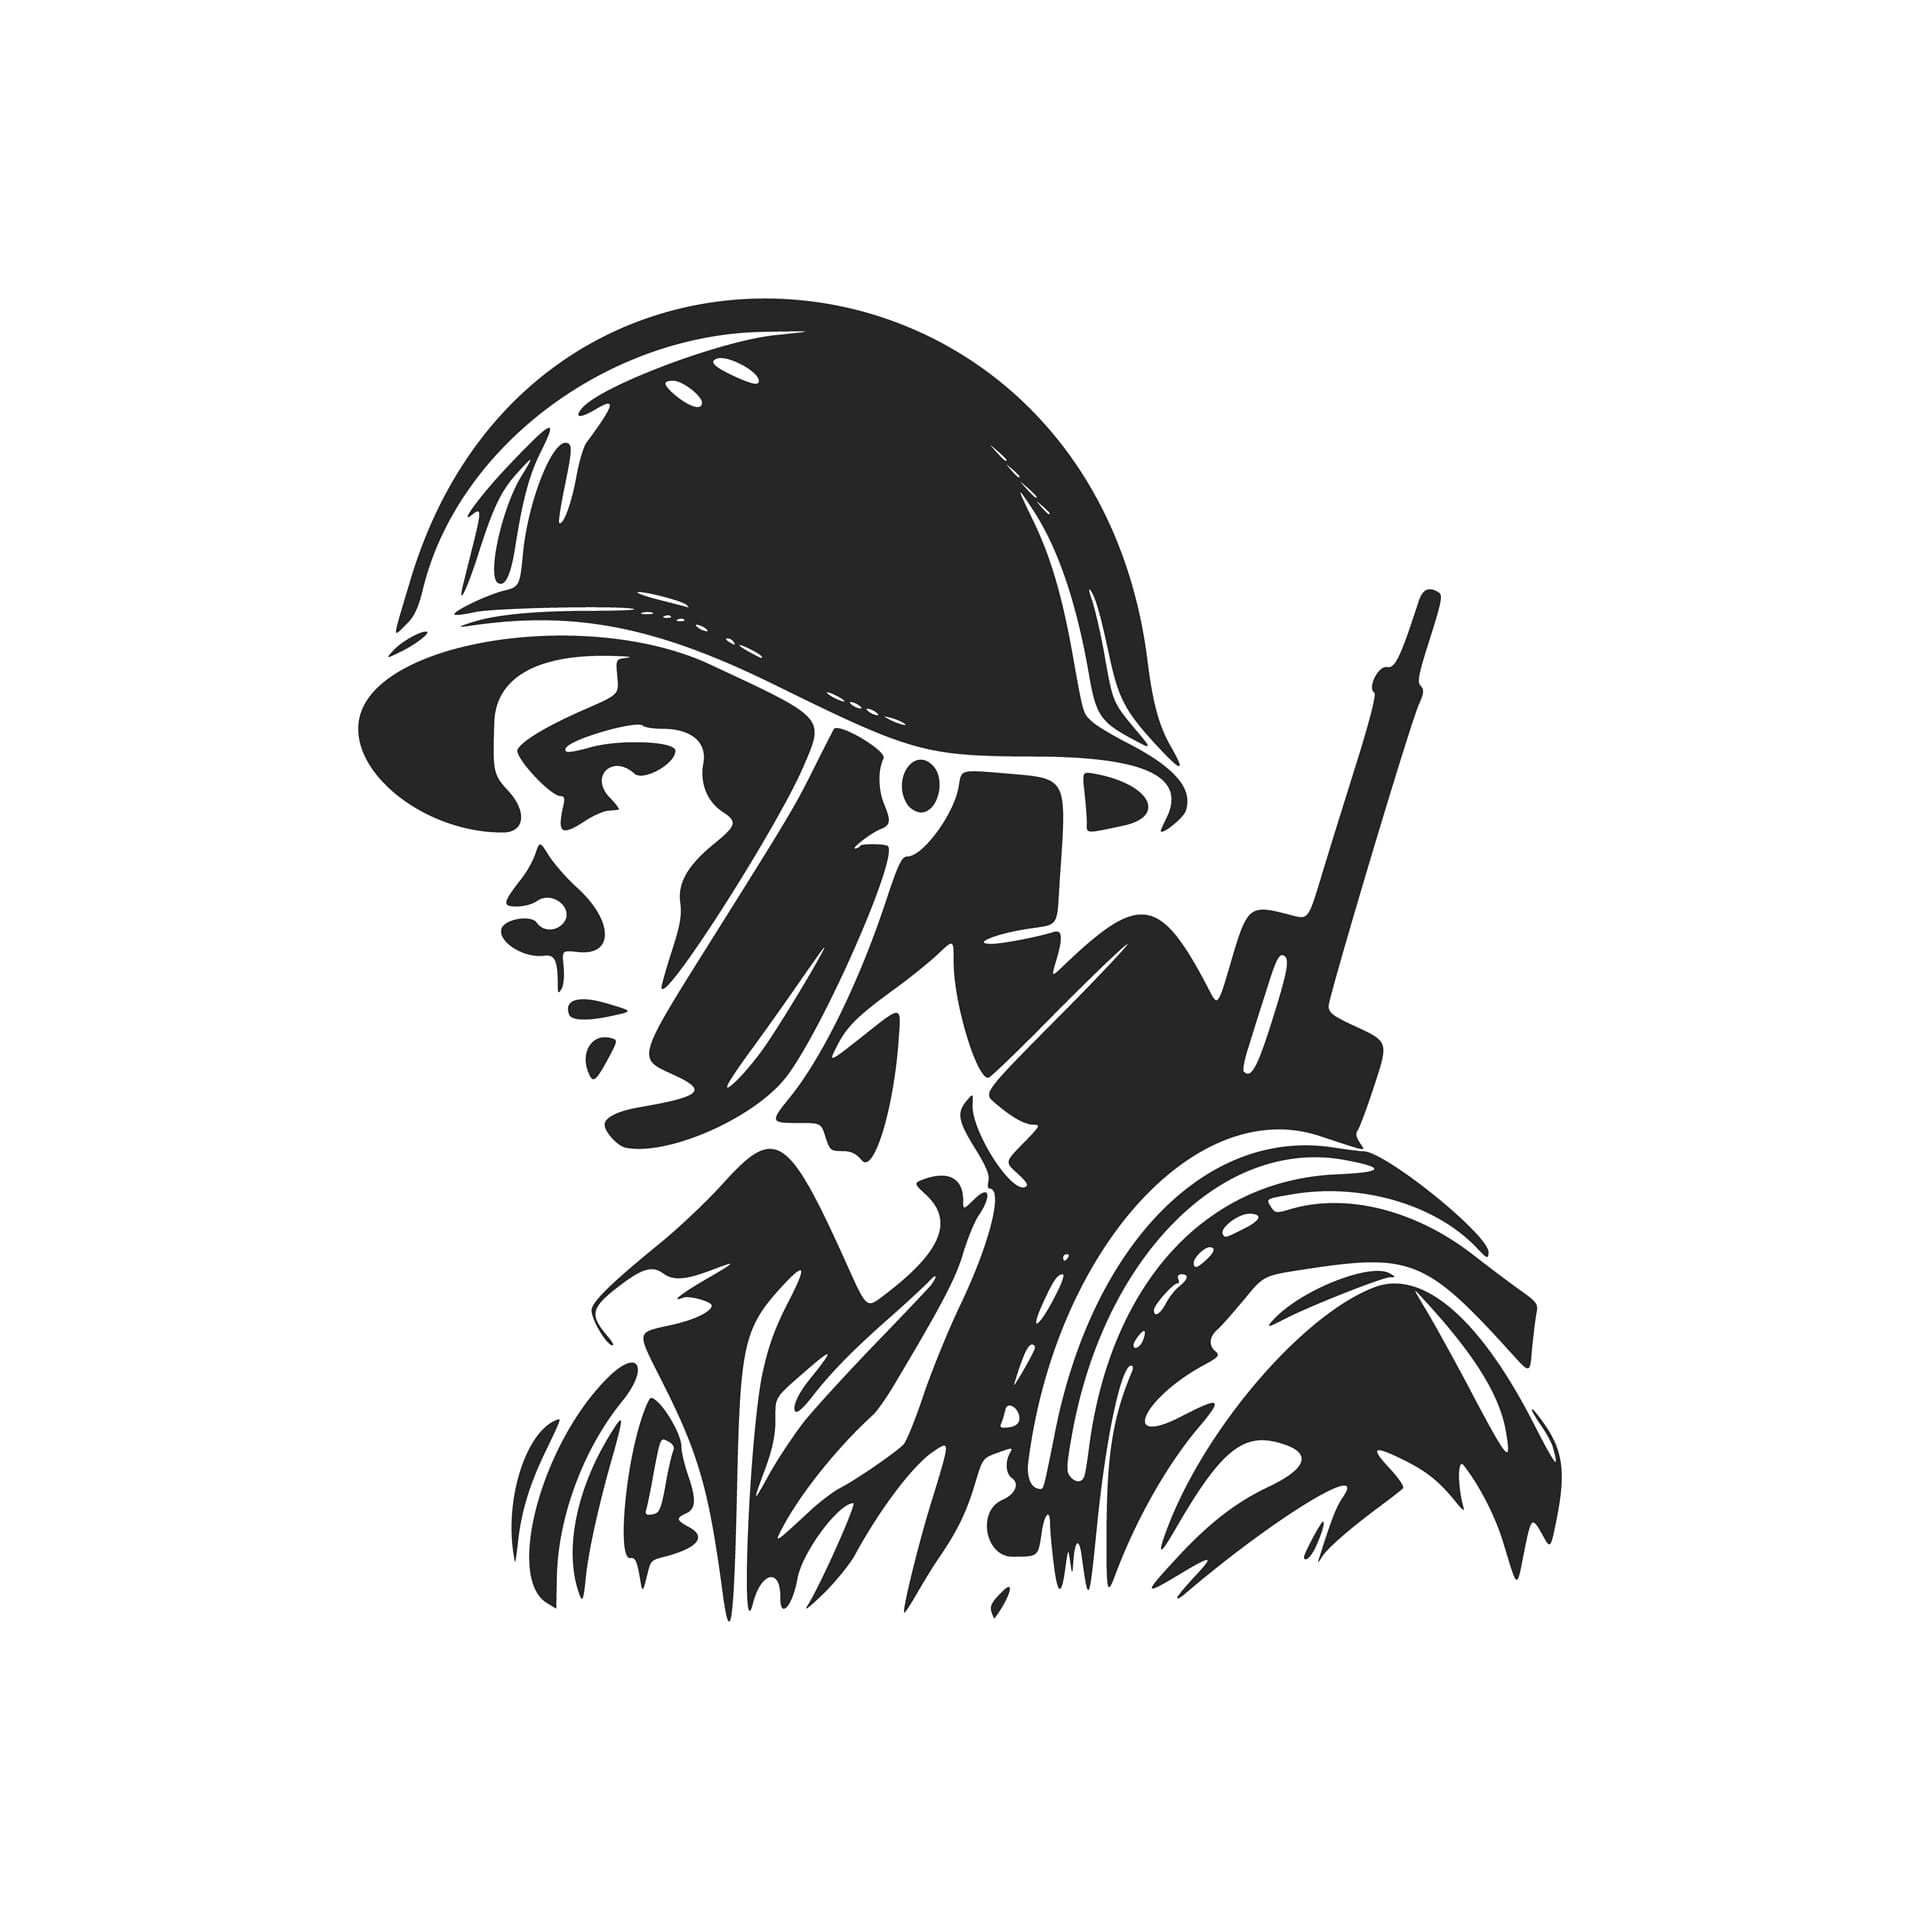 Black white stylish depicting soldier military profile pictures